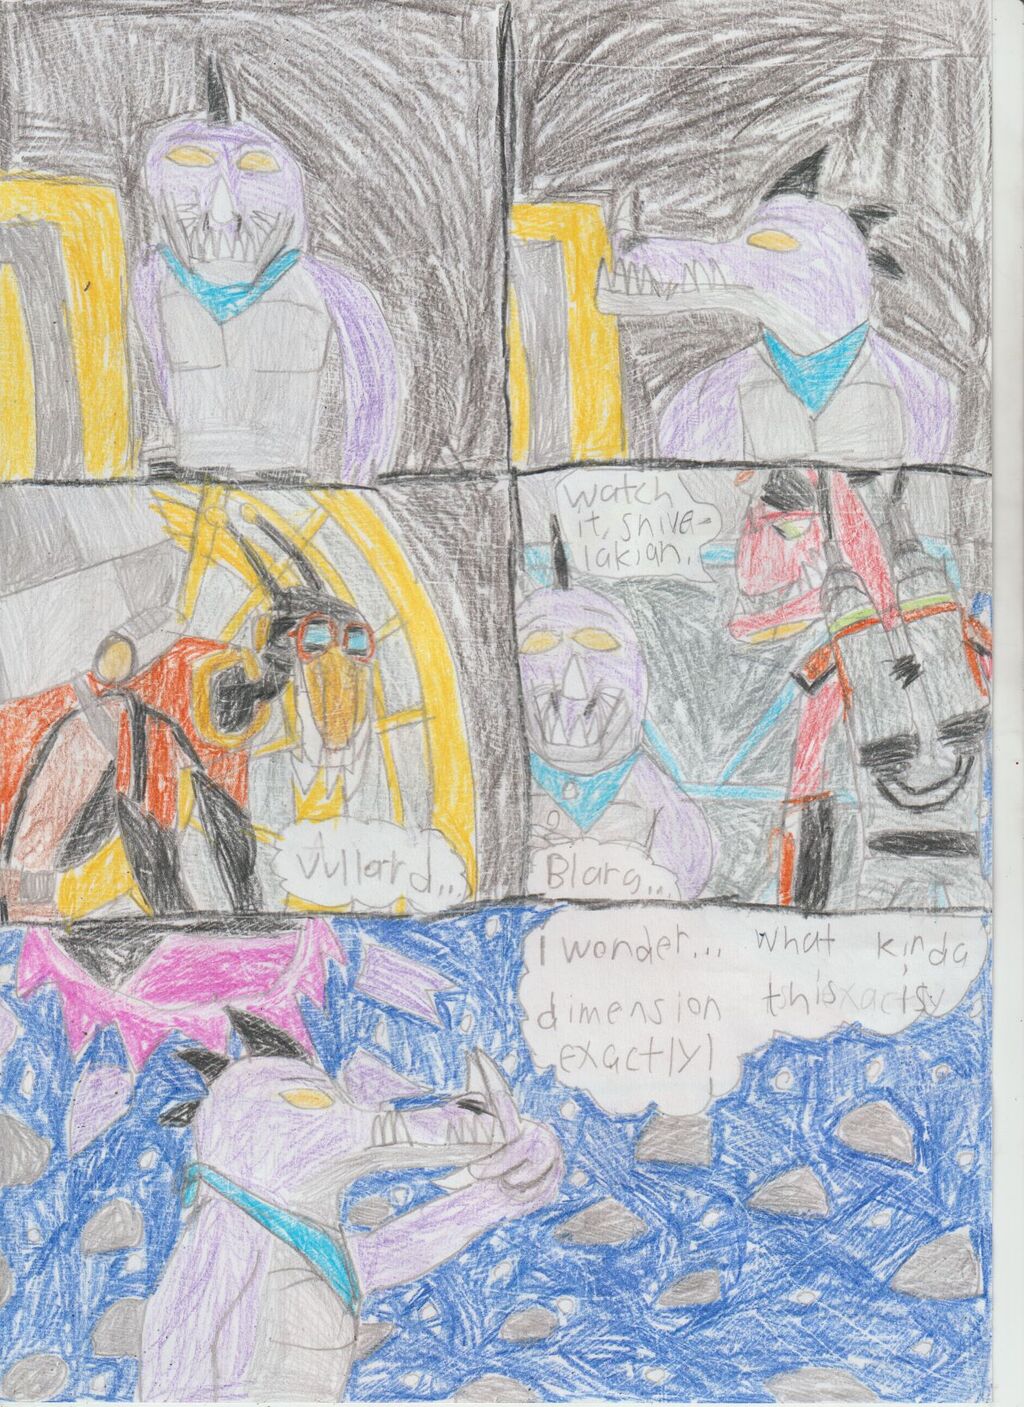 Emperor and guard: Making friends:Pg 6